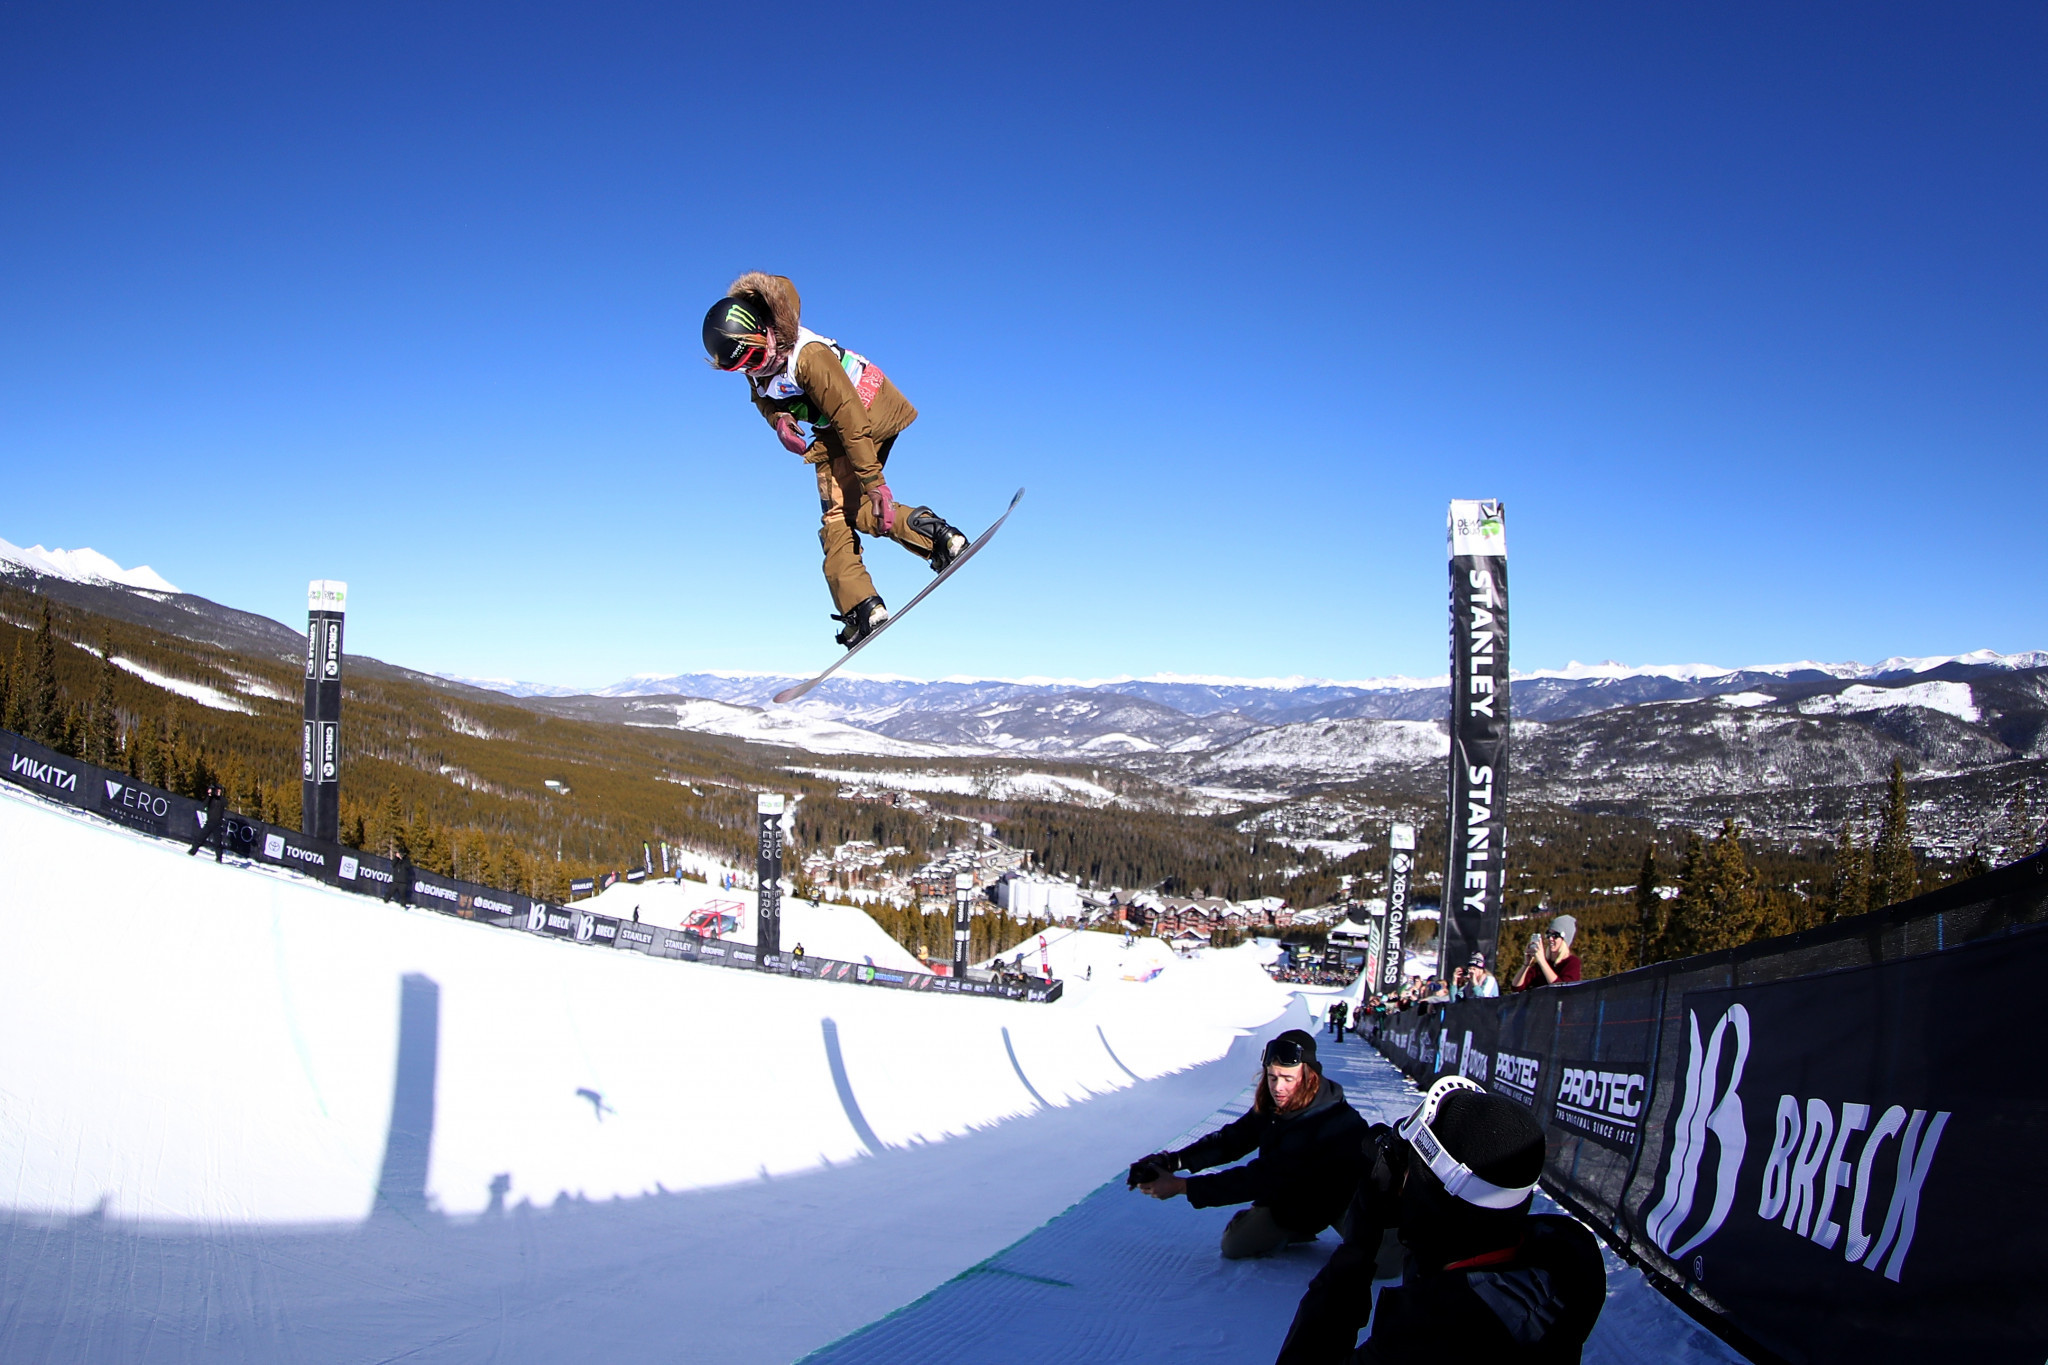 Chloe Kim was in suitably commanding form at the World Cup in Laax ©Getty Images